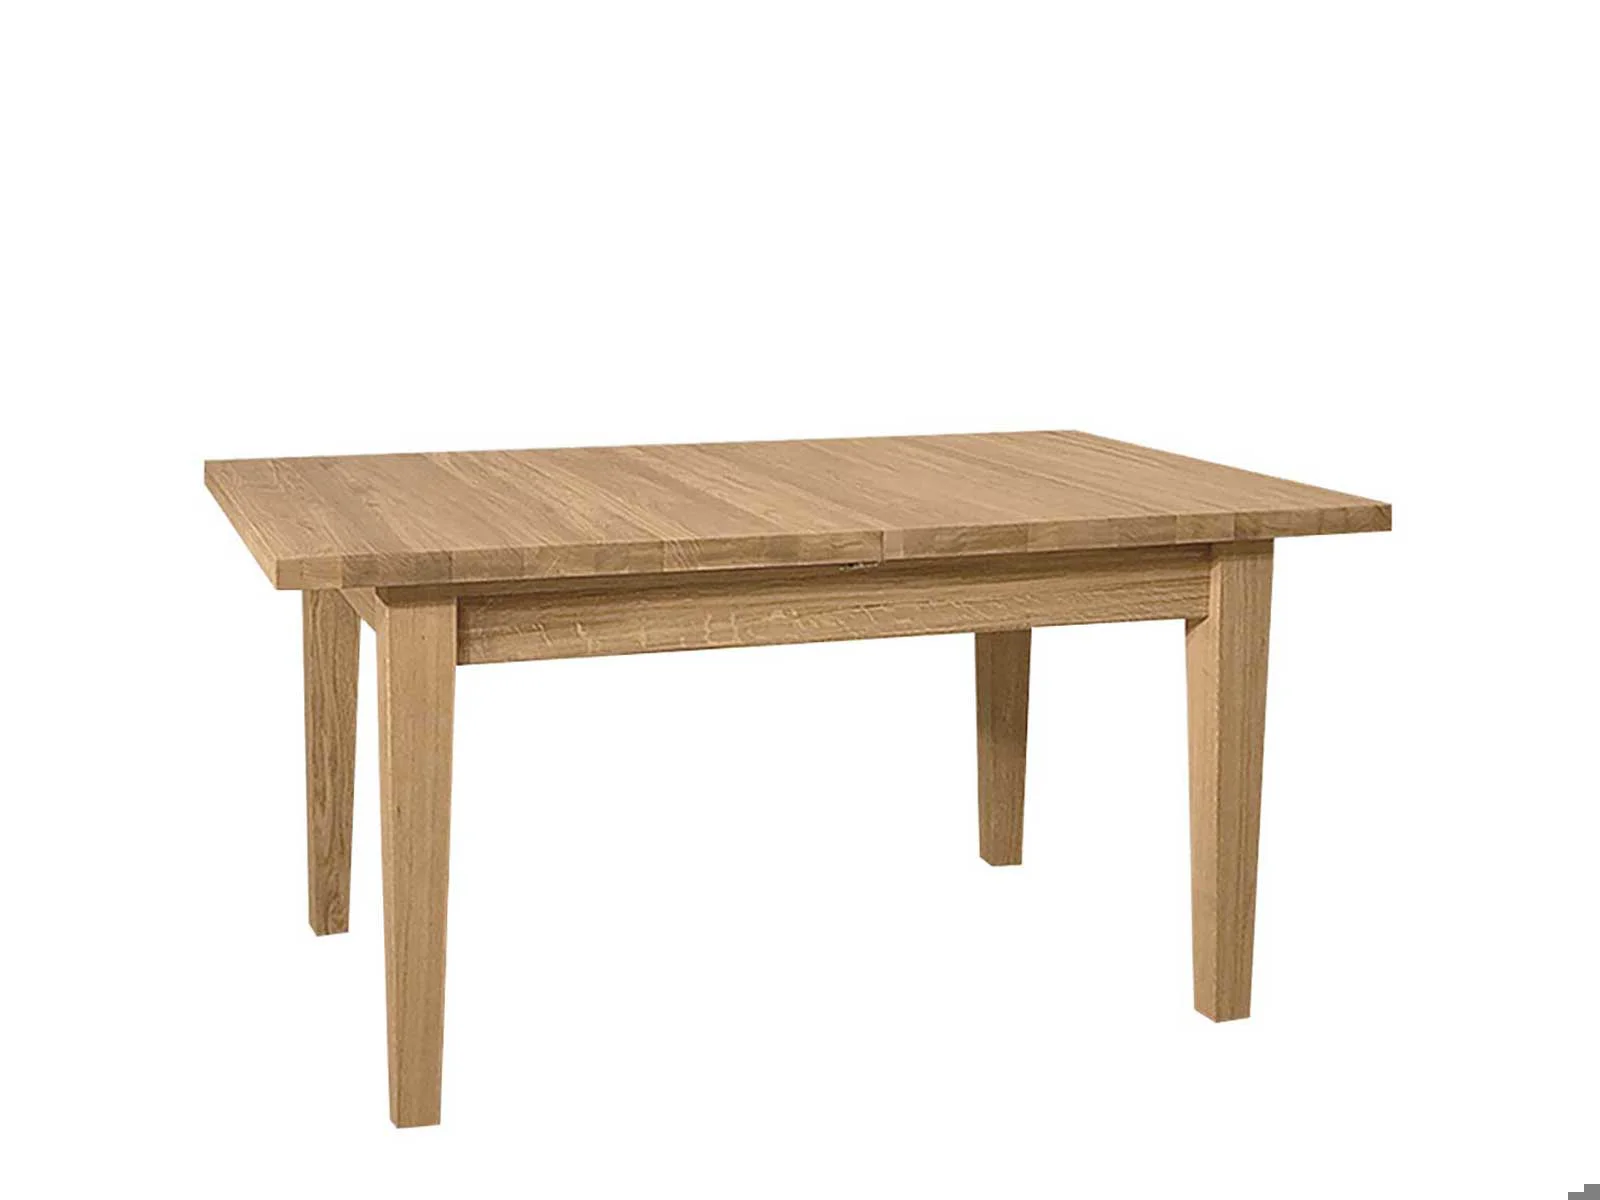 1 Leaf Extending Dining Table